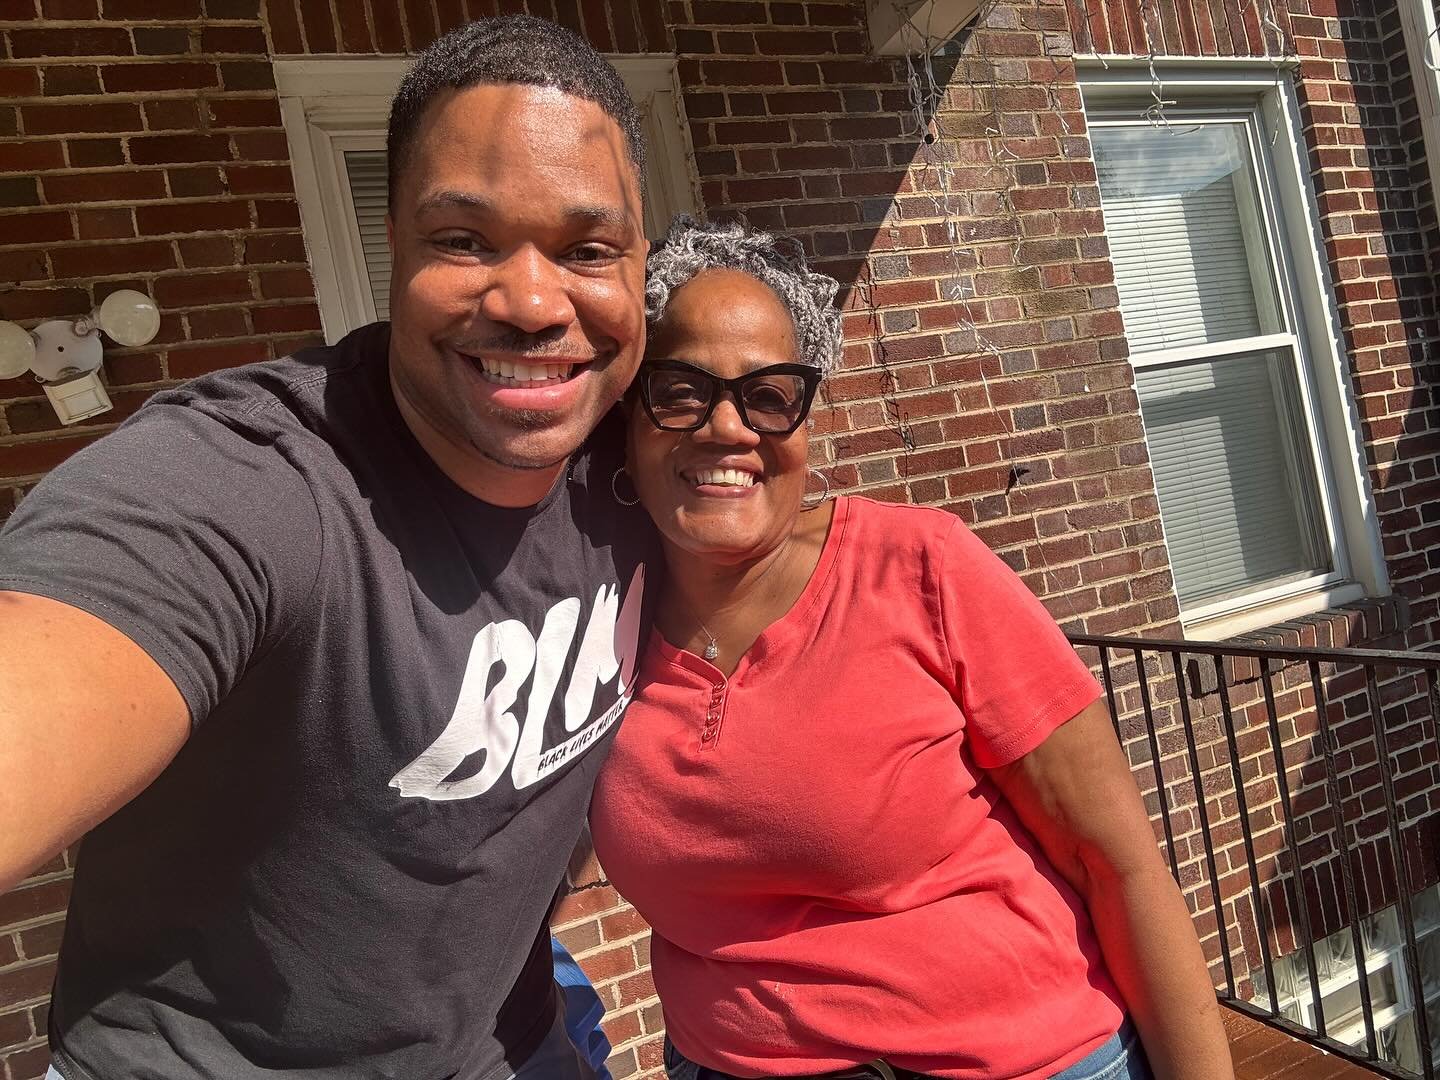 There&rsquo;s nothing better than talking to excited voters on a sunny day! I am energized by the support and thankful to all the voters who have taken the time to speak with me week after week. #TorrenceForBaltimore